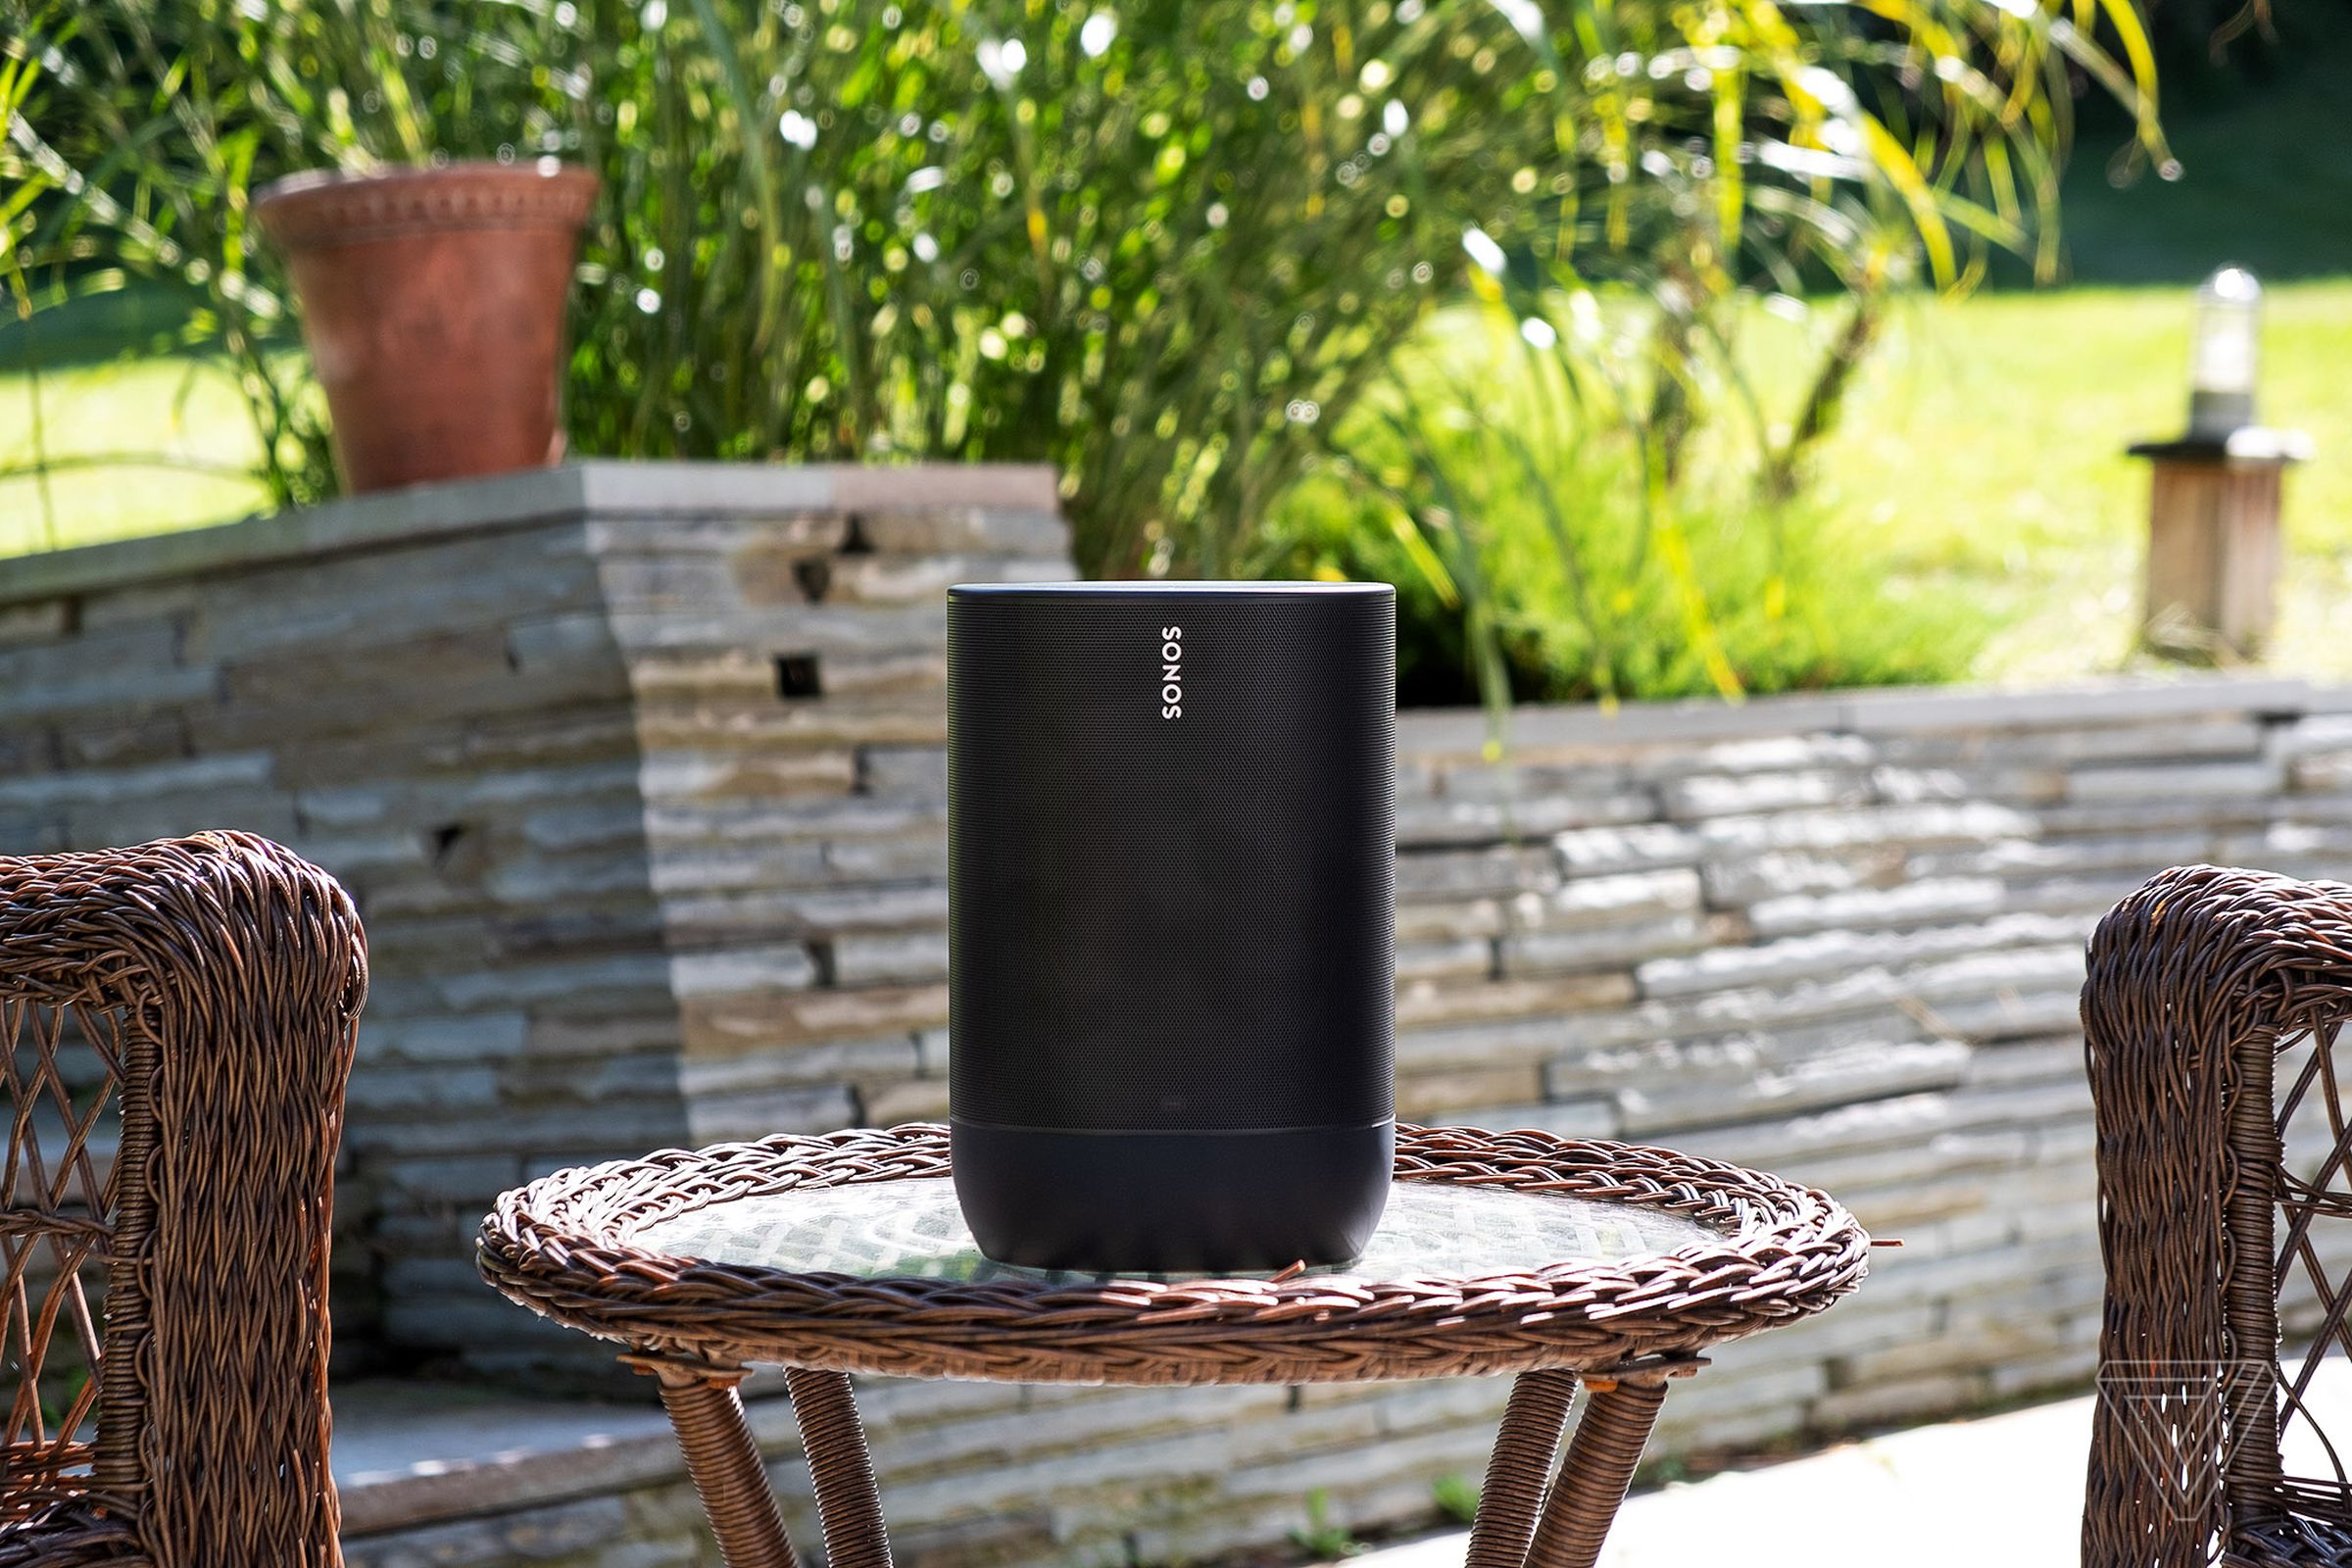 The Sonos Move can be used indoors via Wi-Fi, or connected to your devices over Bluetooth.